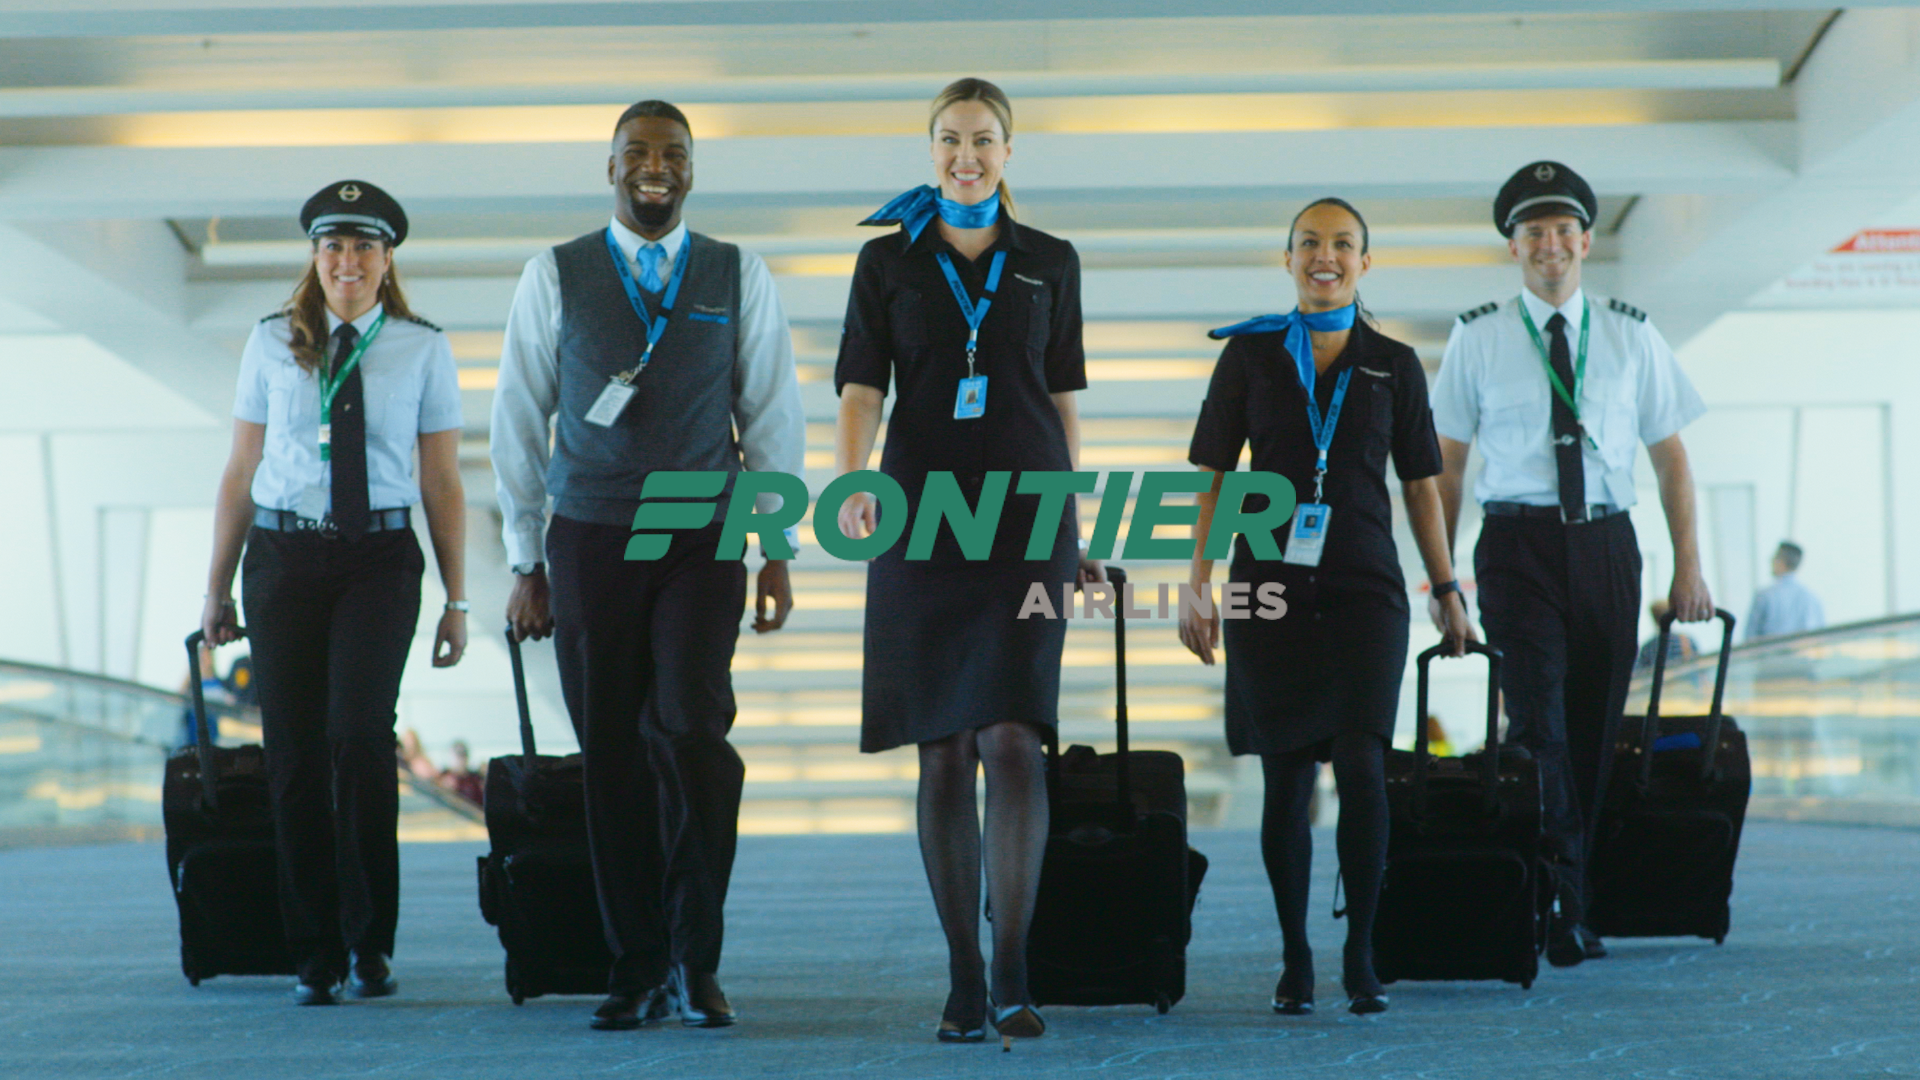 Flight Attendant by Frontier Airlines